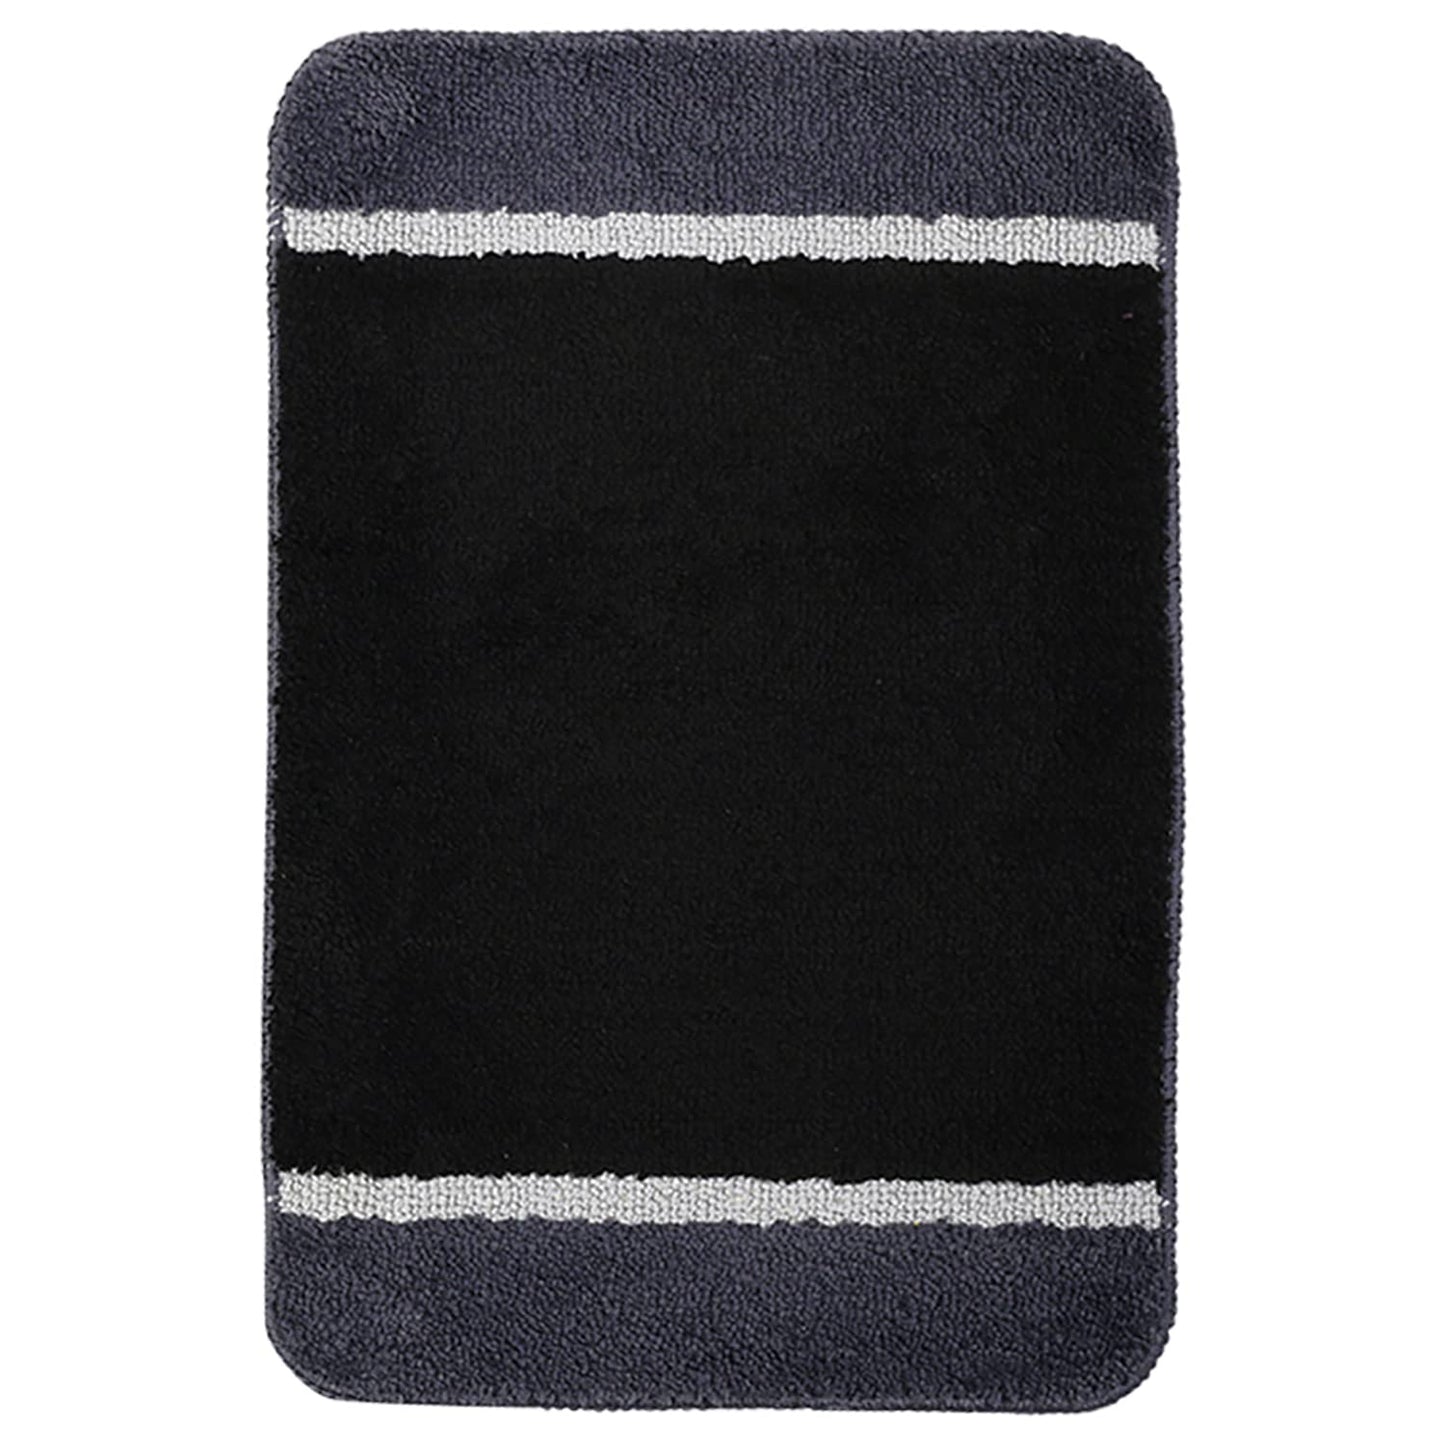 Kashyapa Rugs Collection - Affordable Mat for Floor Black & Grey Super Soft Microfiber Door Mats for Home & Office. pack of 1 Pcs.